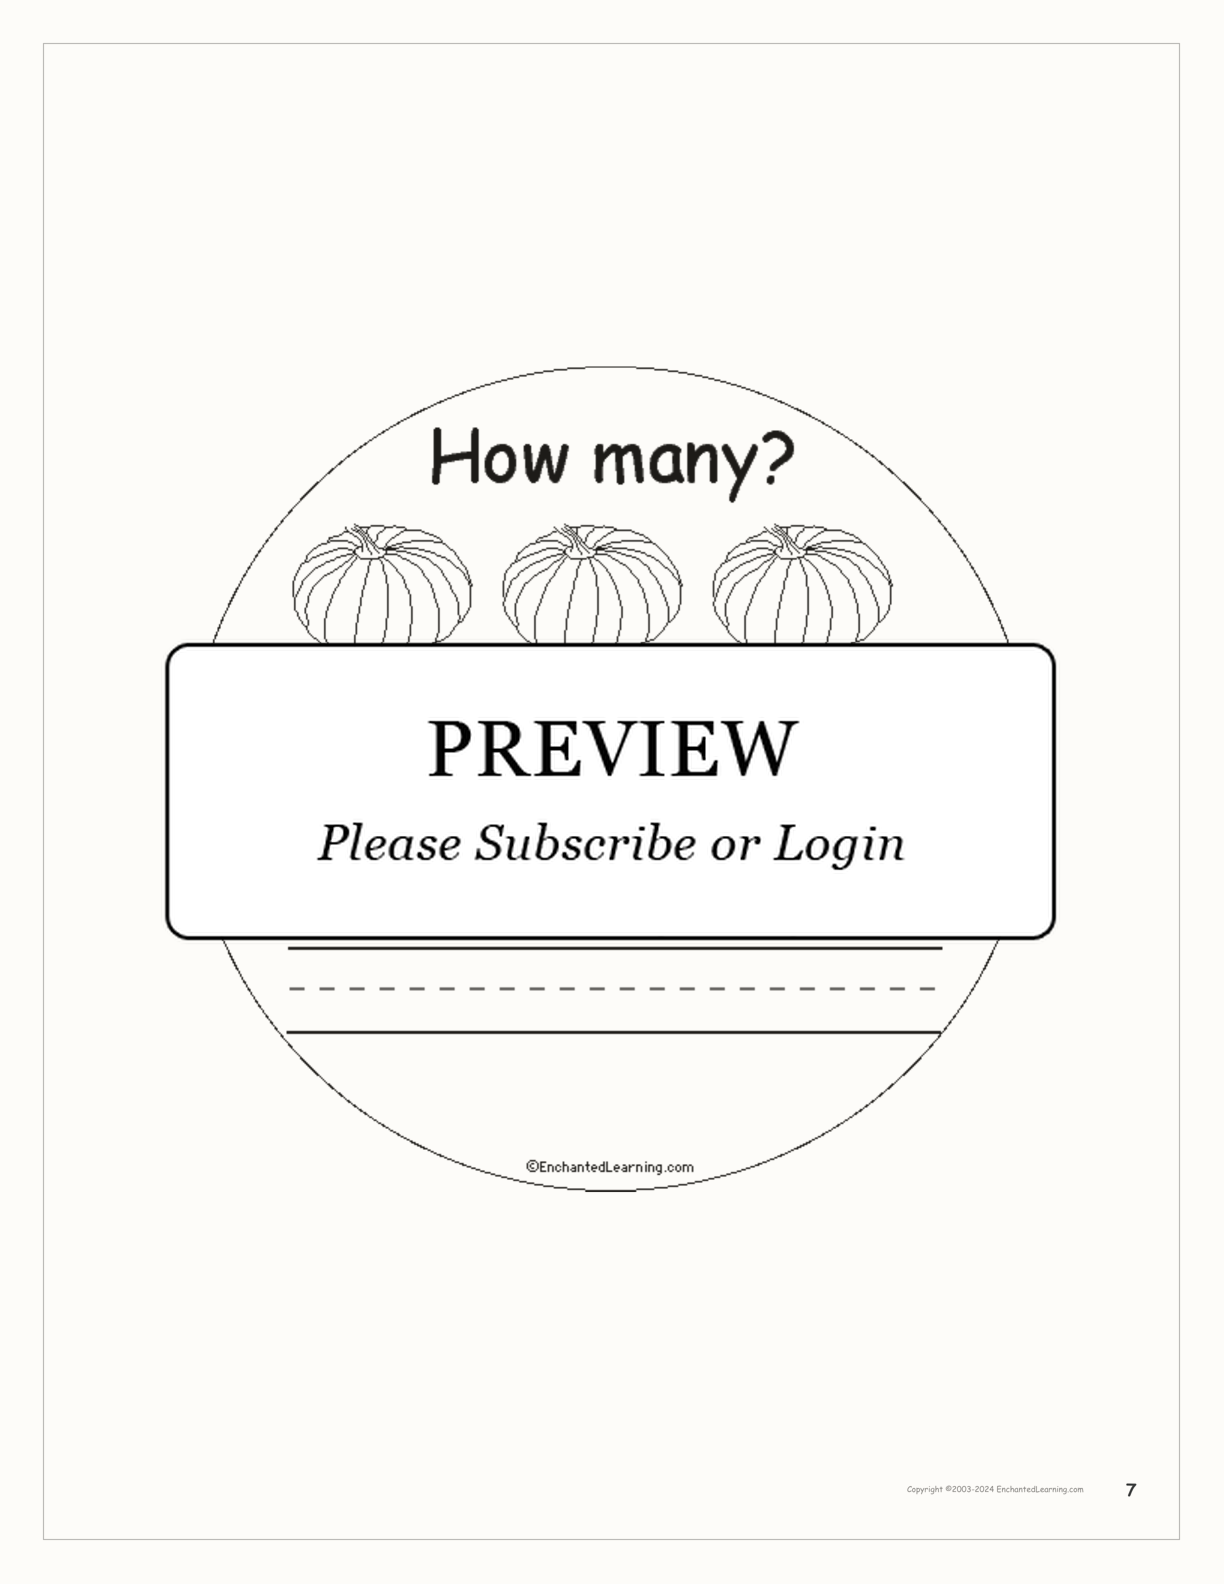 How Many Pumpkins? interactive printout page 7